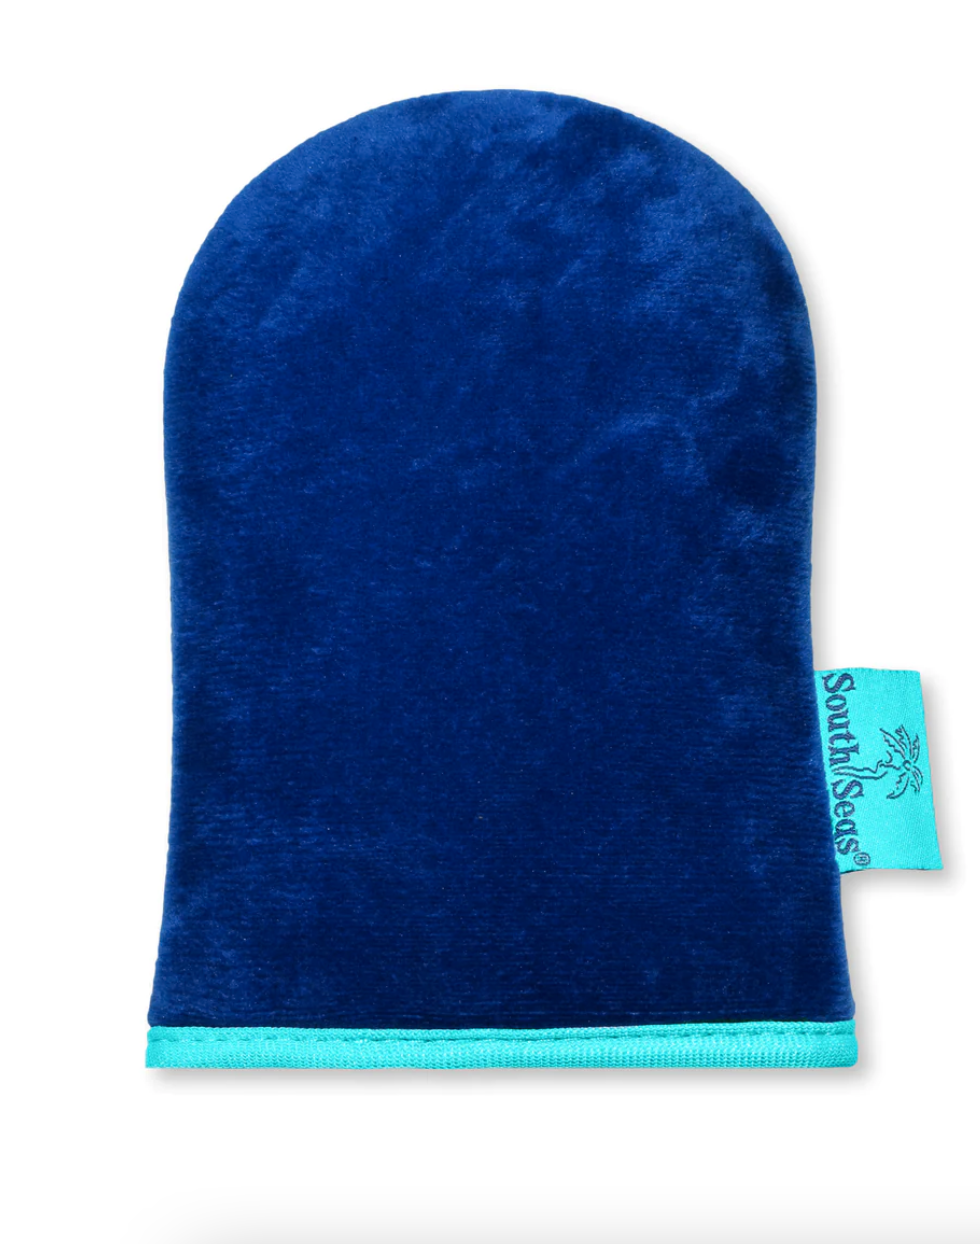 A royal blue Sea Sponge Bronzing Mitt with a bright teal trim and a label reading &quot;South Seas Skincare&quot; attached to the side, displayed against a white Bungalow background.